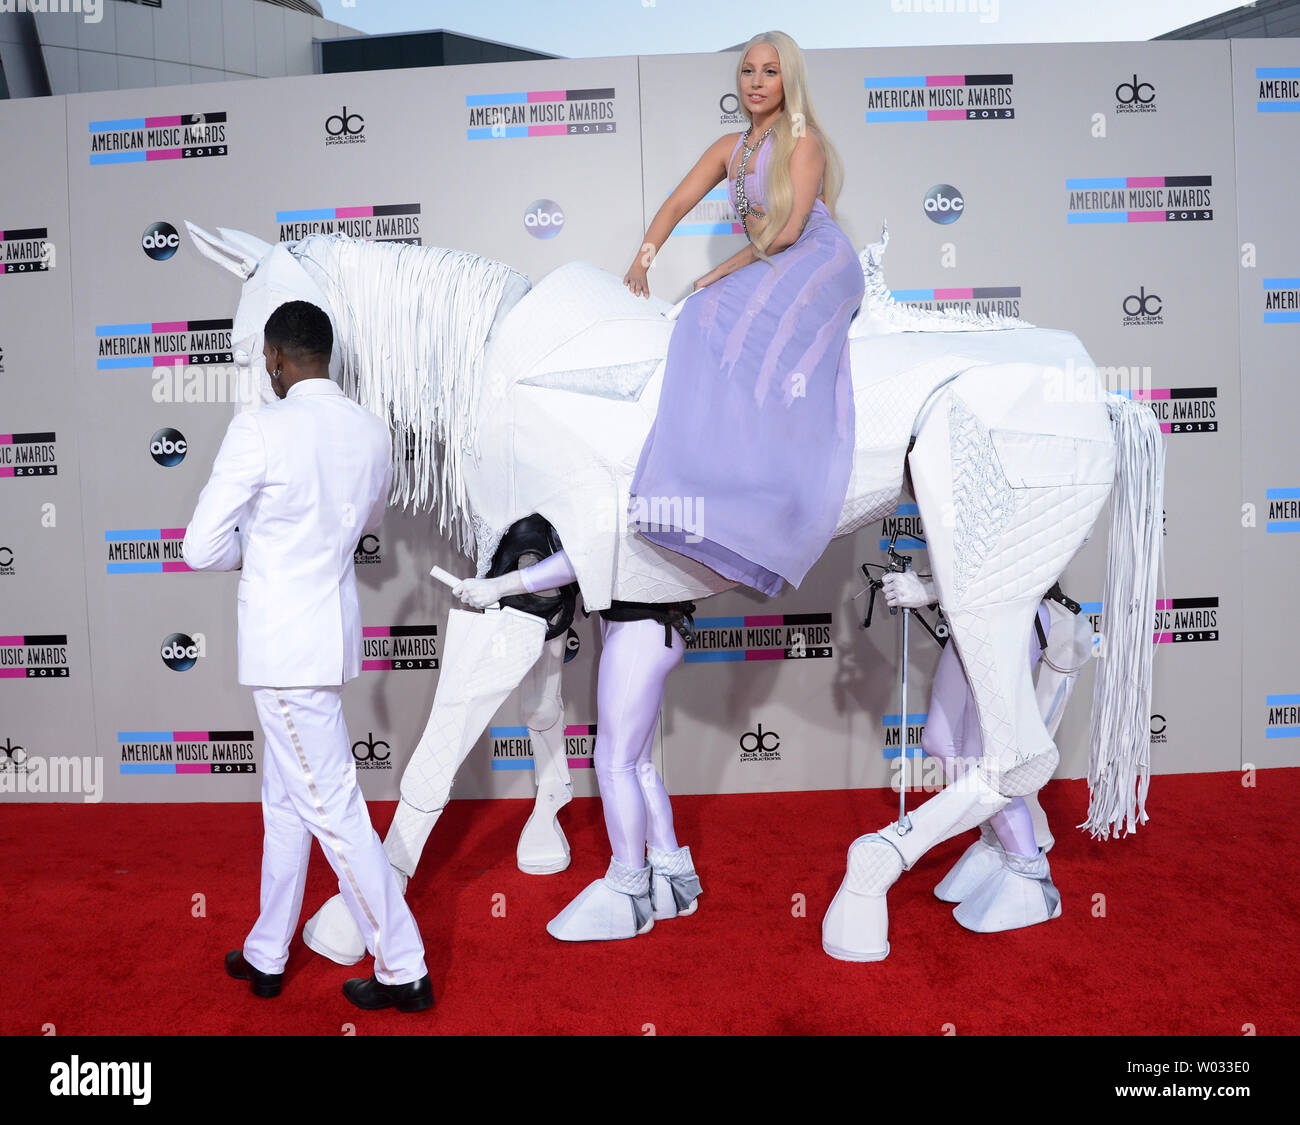 Recording artist Lady Gaga arrives for the 41st annual American Music Awards held at Nokia Theatre L.A. Live in Los Angeles on November 24, 2013.  UPI/Phil McCarten Stock Photo